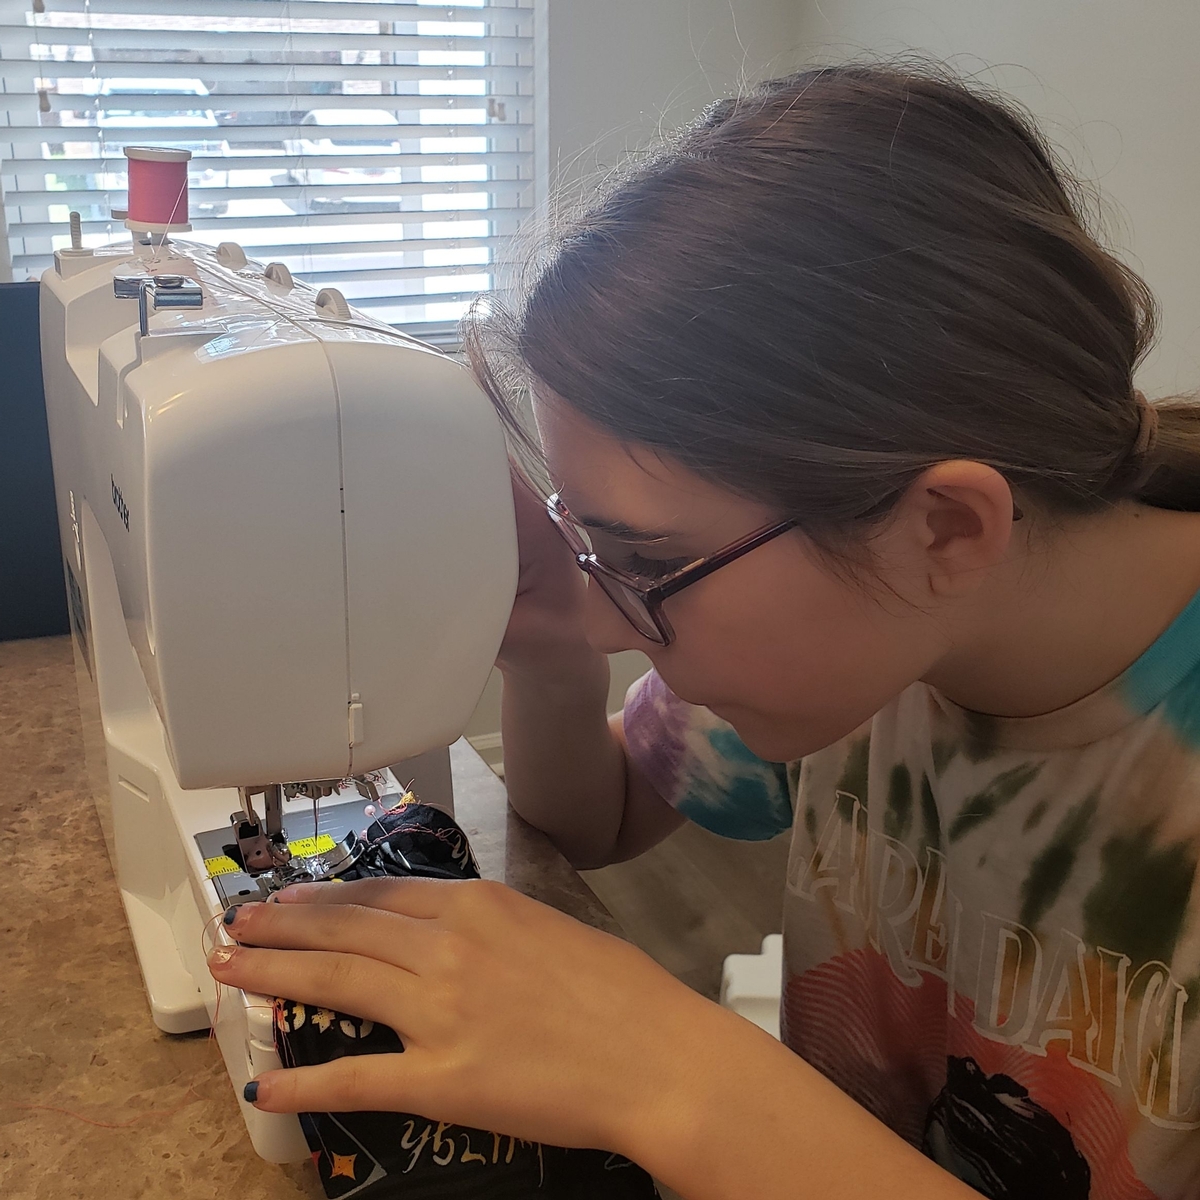 Pinewood student Sophia Yanzetich spent her spring break sewing masks for hospice employees.